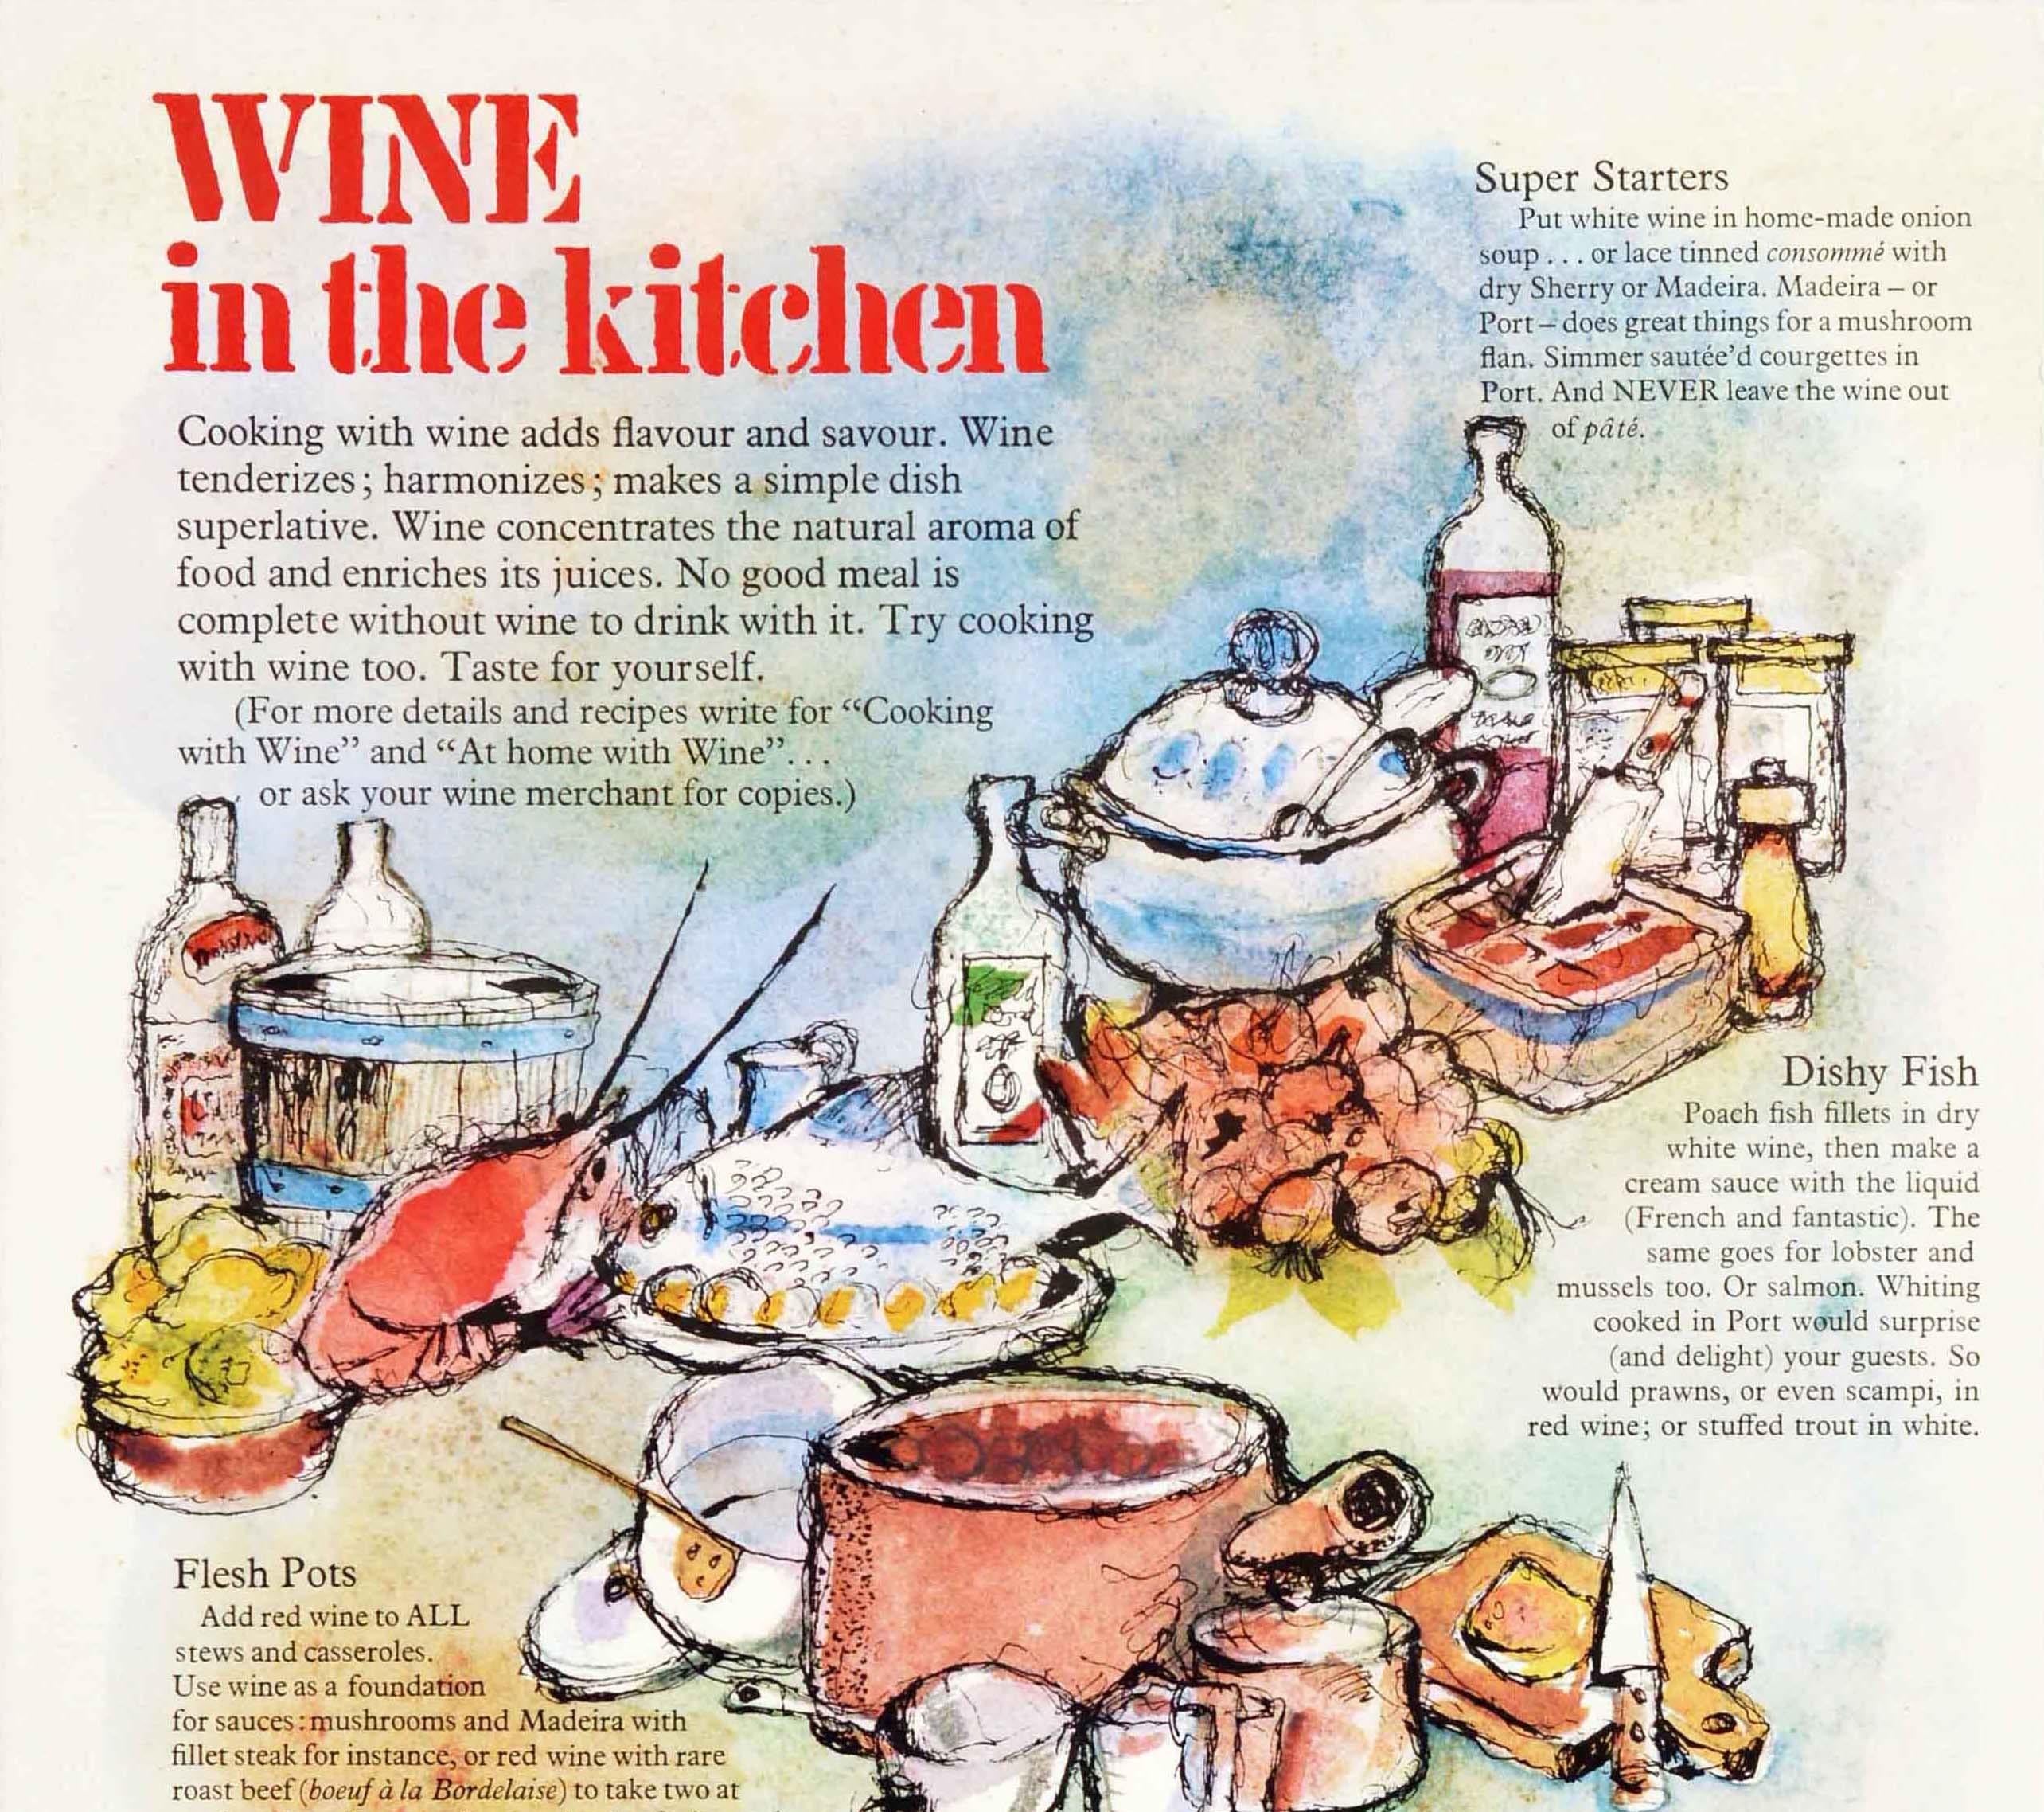 Original vintage cooking poster featuring colourful illustrations of pots, pans, fish, meat, vegetables, fruit, salt and pepper, a cutting board and knife, food packets, oil, wine and serving dishes in a kitchen setting running between the